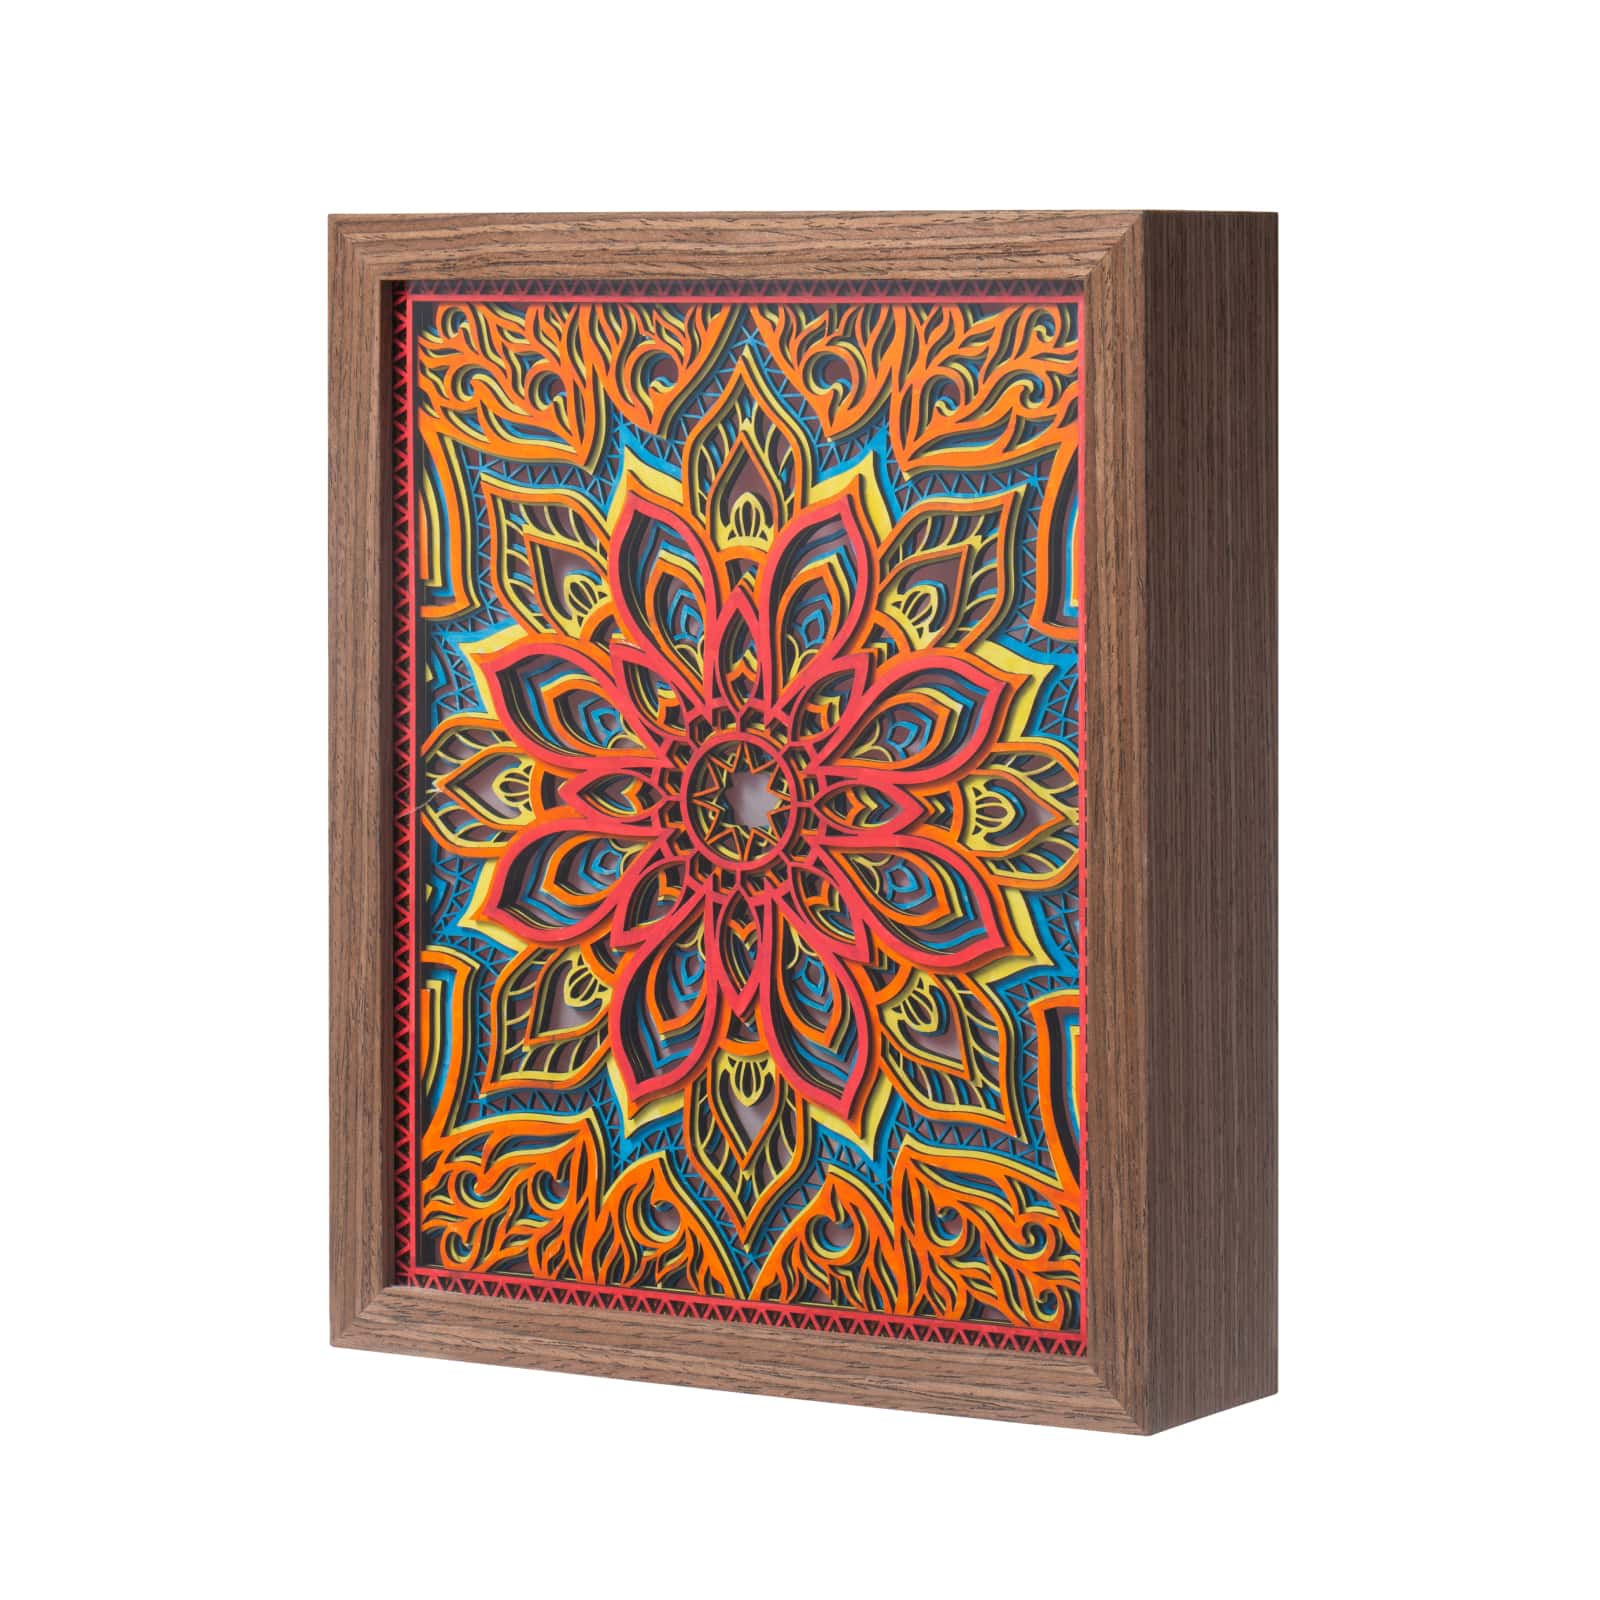 xTool ColorBeam Mandala All-in-one Kit